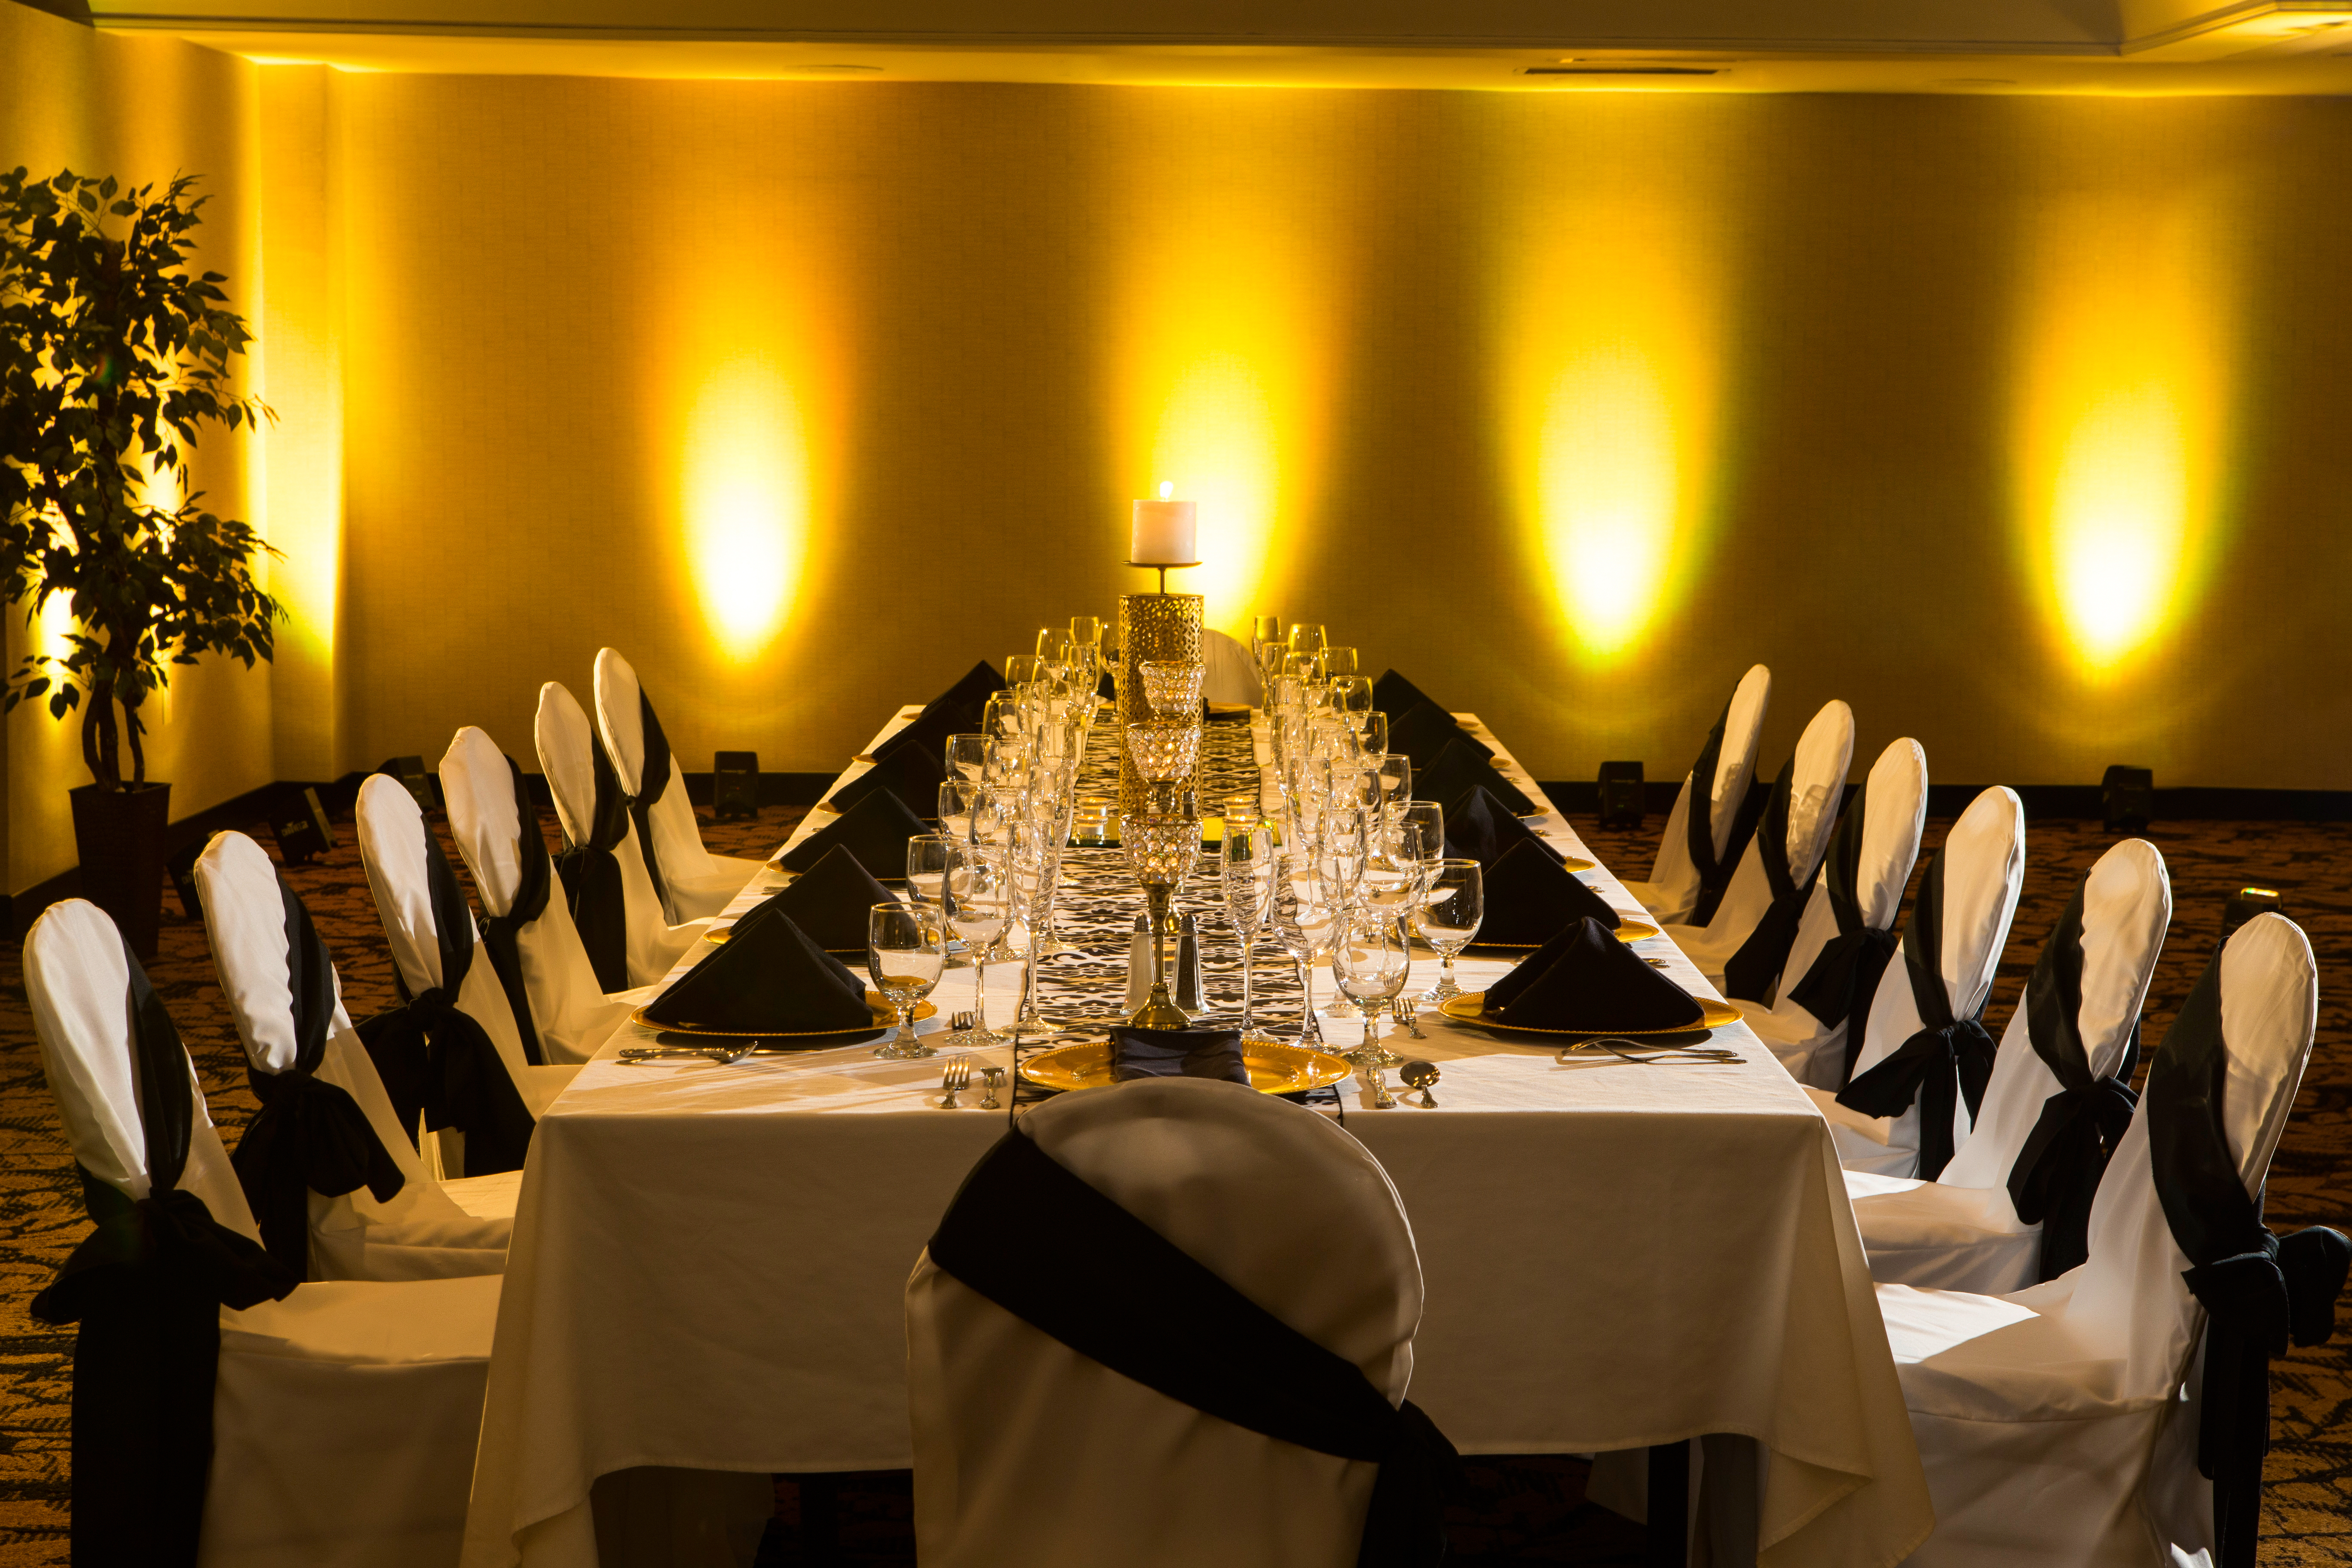 Large Table With White Linens, Black Napkins, Place Settings, and White Chairs With Black Sashes in Dramatically Lit Reception Room